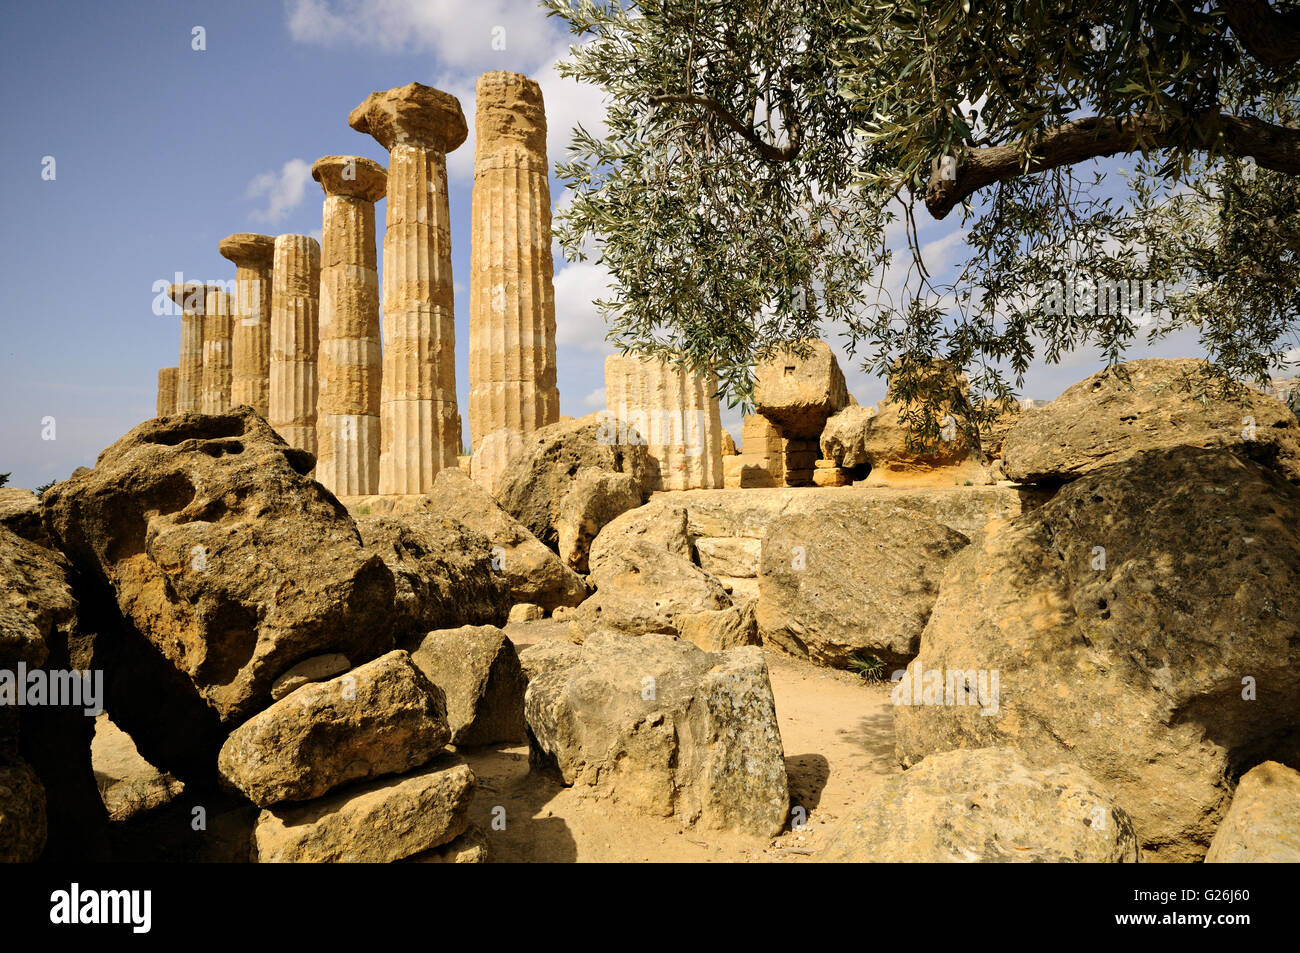 Ruins of the Temple of Heracles (or Temple of Hercules), Valle dei Templi, Sicily, Italy Stock Photo